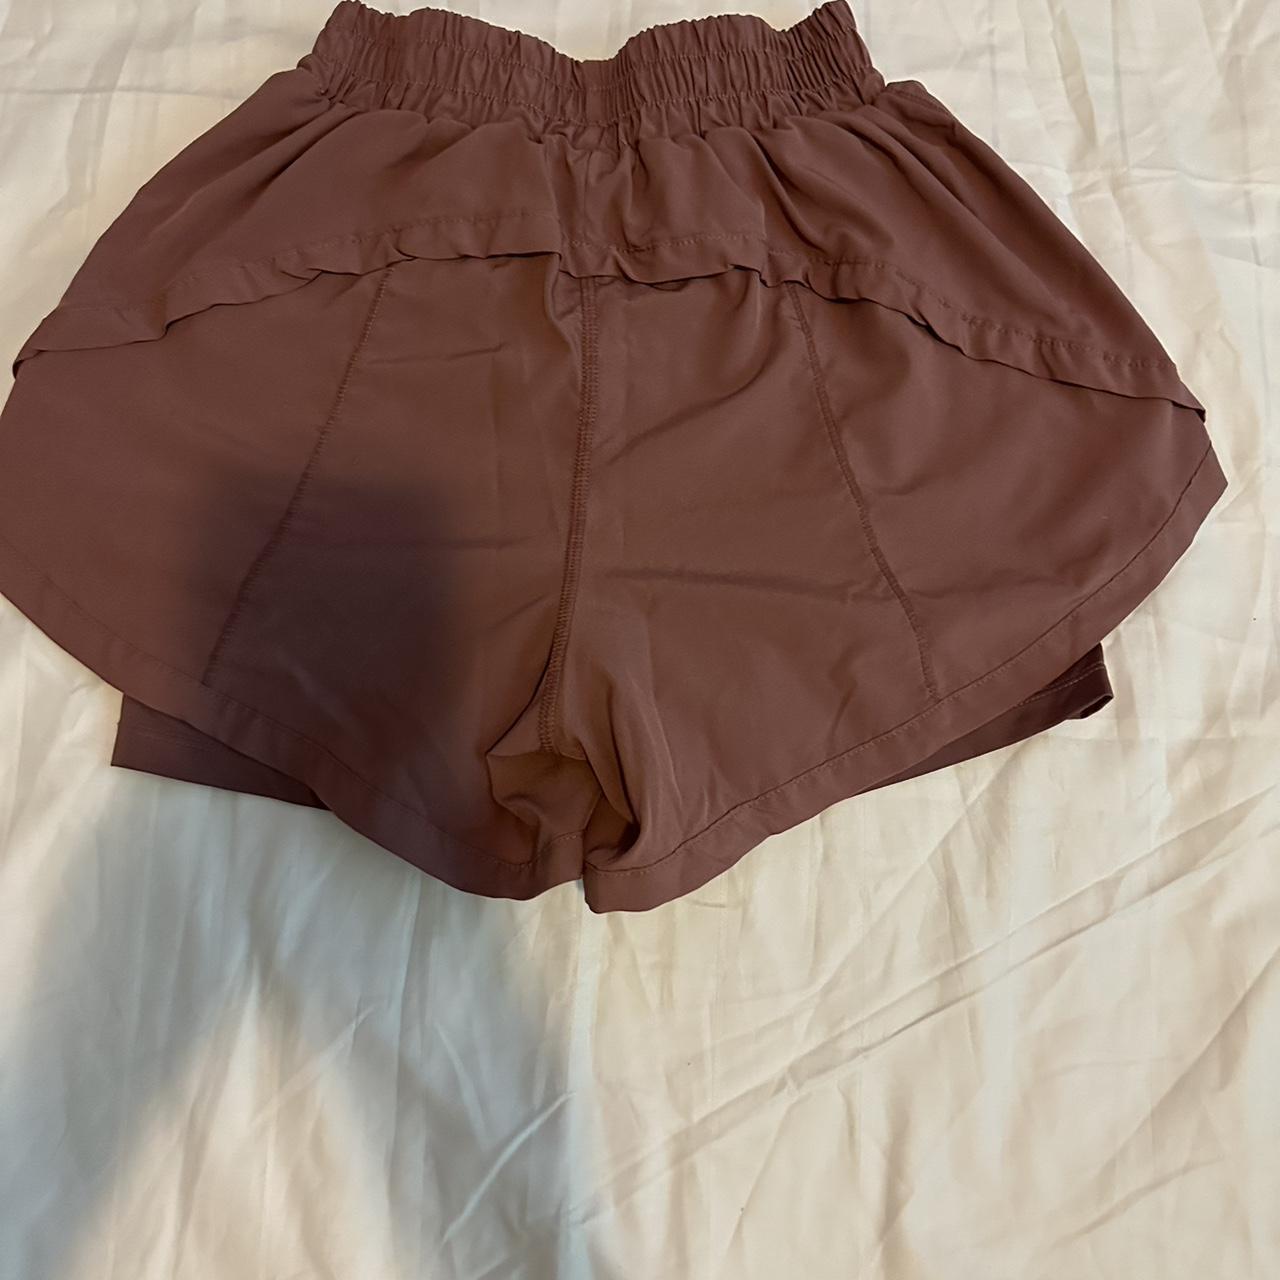 AS Revival Women's Burgundy and Pink Shorts (2)